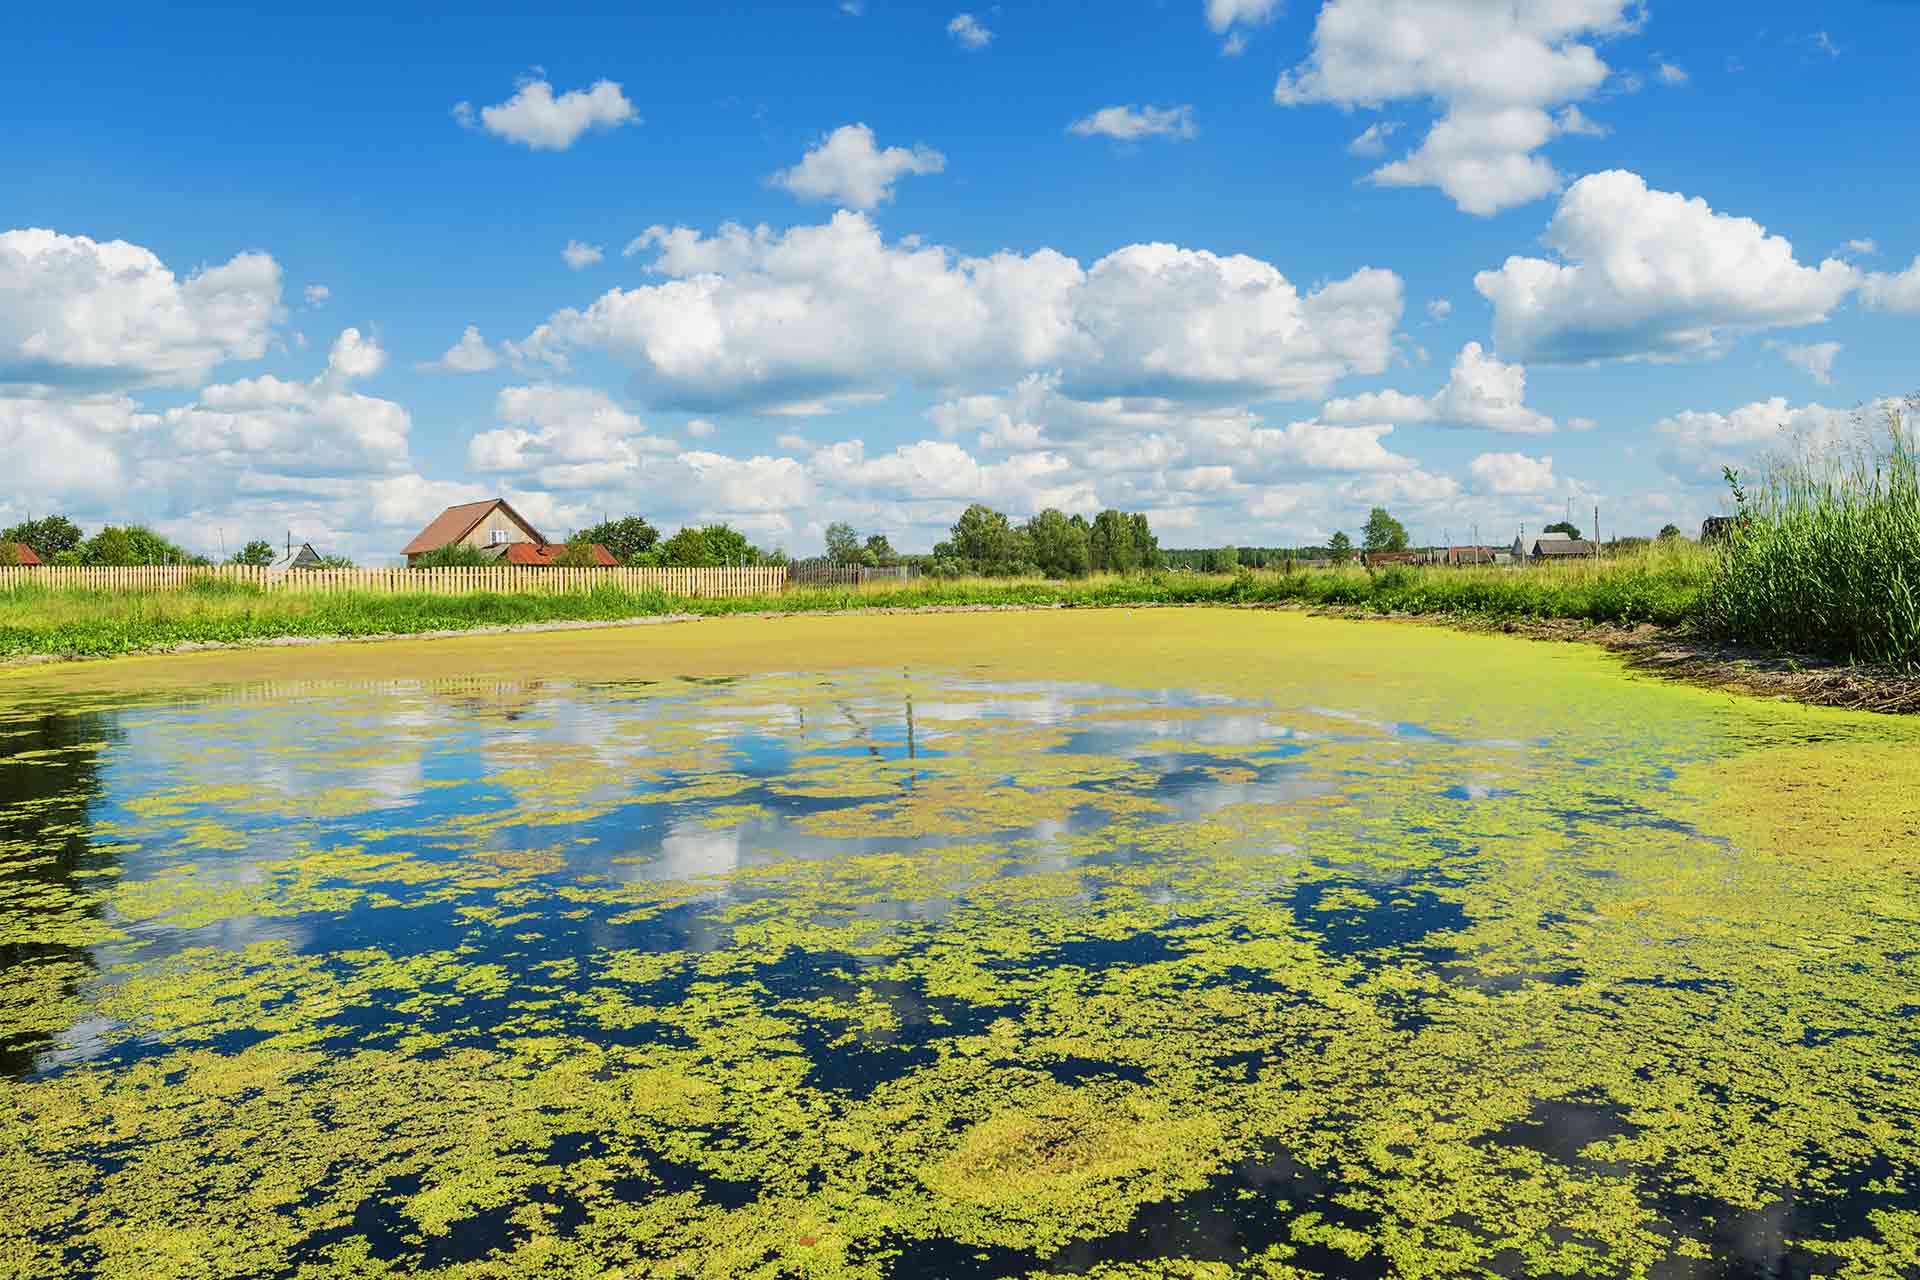 https://www.checkatrade.com/blog/wp-content/uploads/2021/06/Feature-How-to-remove-green-algae-from-pond.jpg